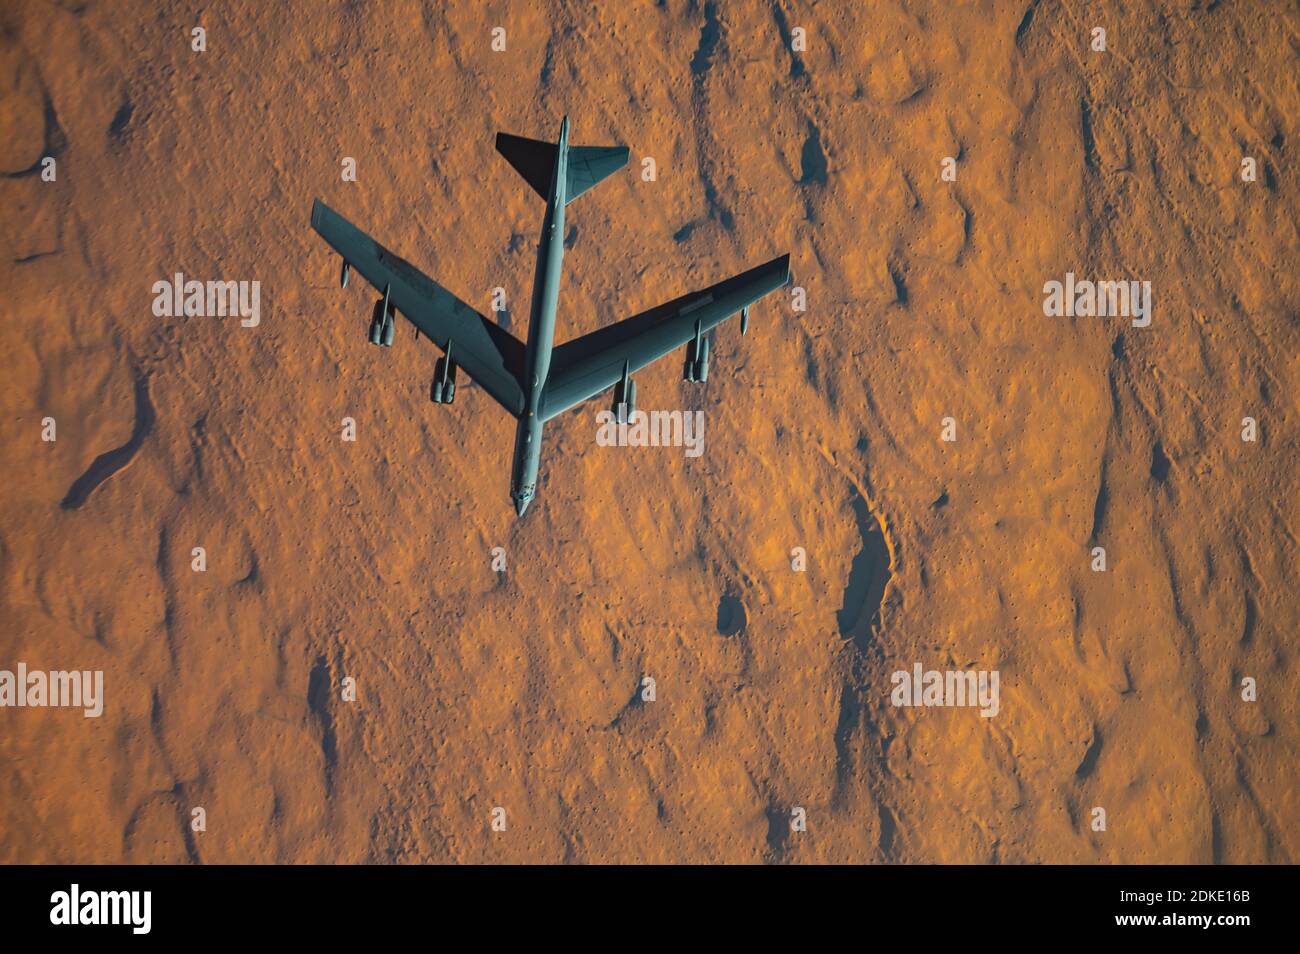 A U.S. Air Force B-52 Stratofortress strategic bomber aircraft from the 2nd Bomb Wing, inflight during a multi-day Bomber Task Force mission December 10, 2020 over Qatar. The bomber was relocated to the region following an increase in tensions with Iran. Stock Photo